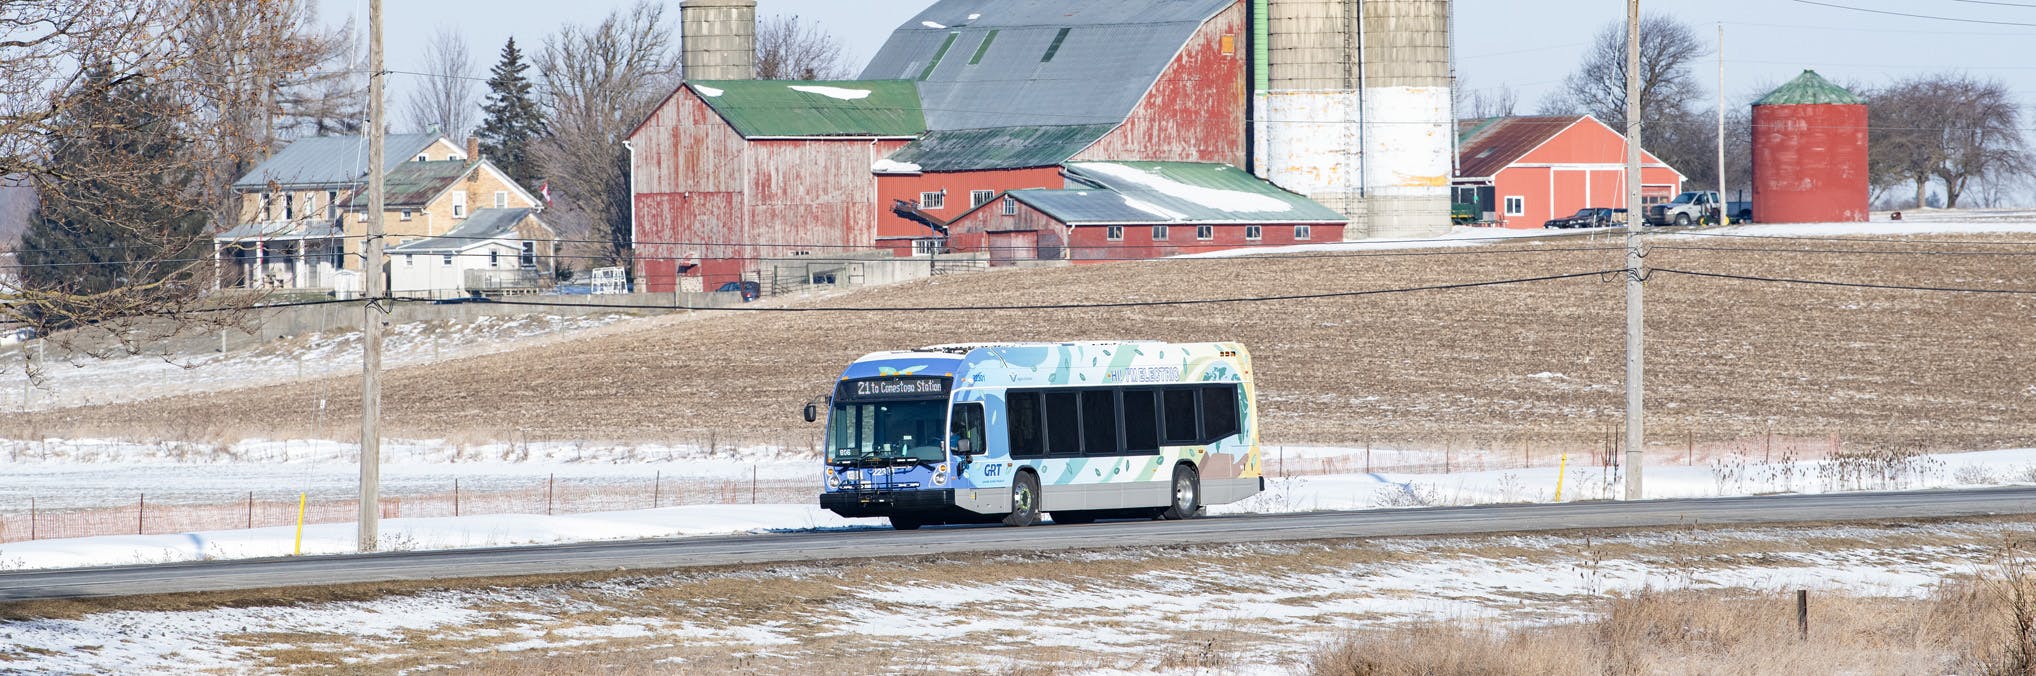 GRT's electric bus travelling through Woolwich Township.